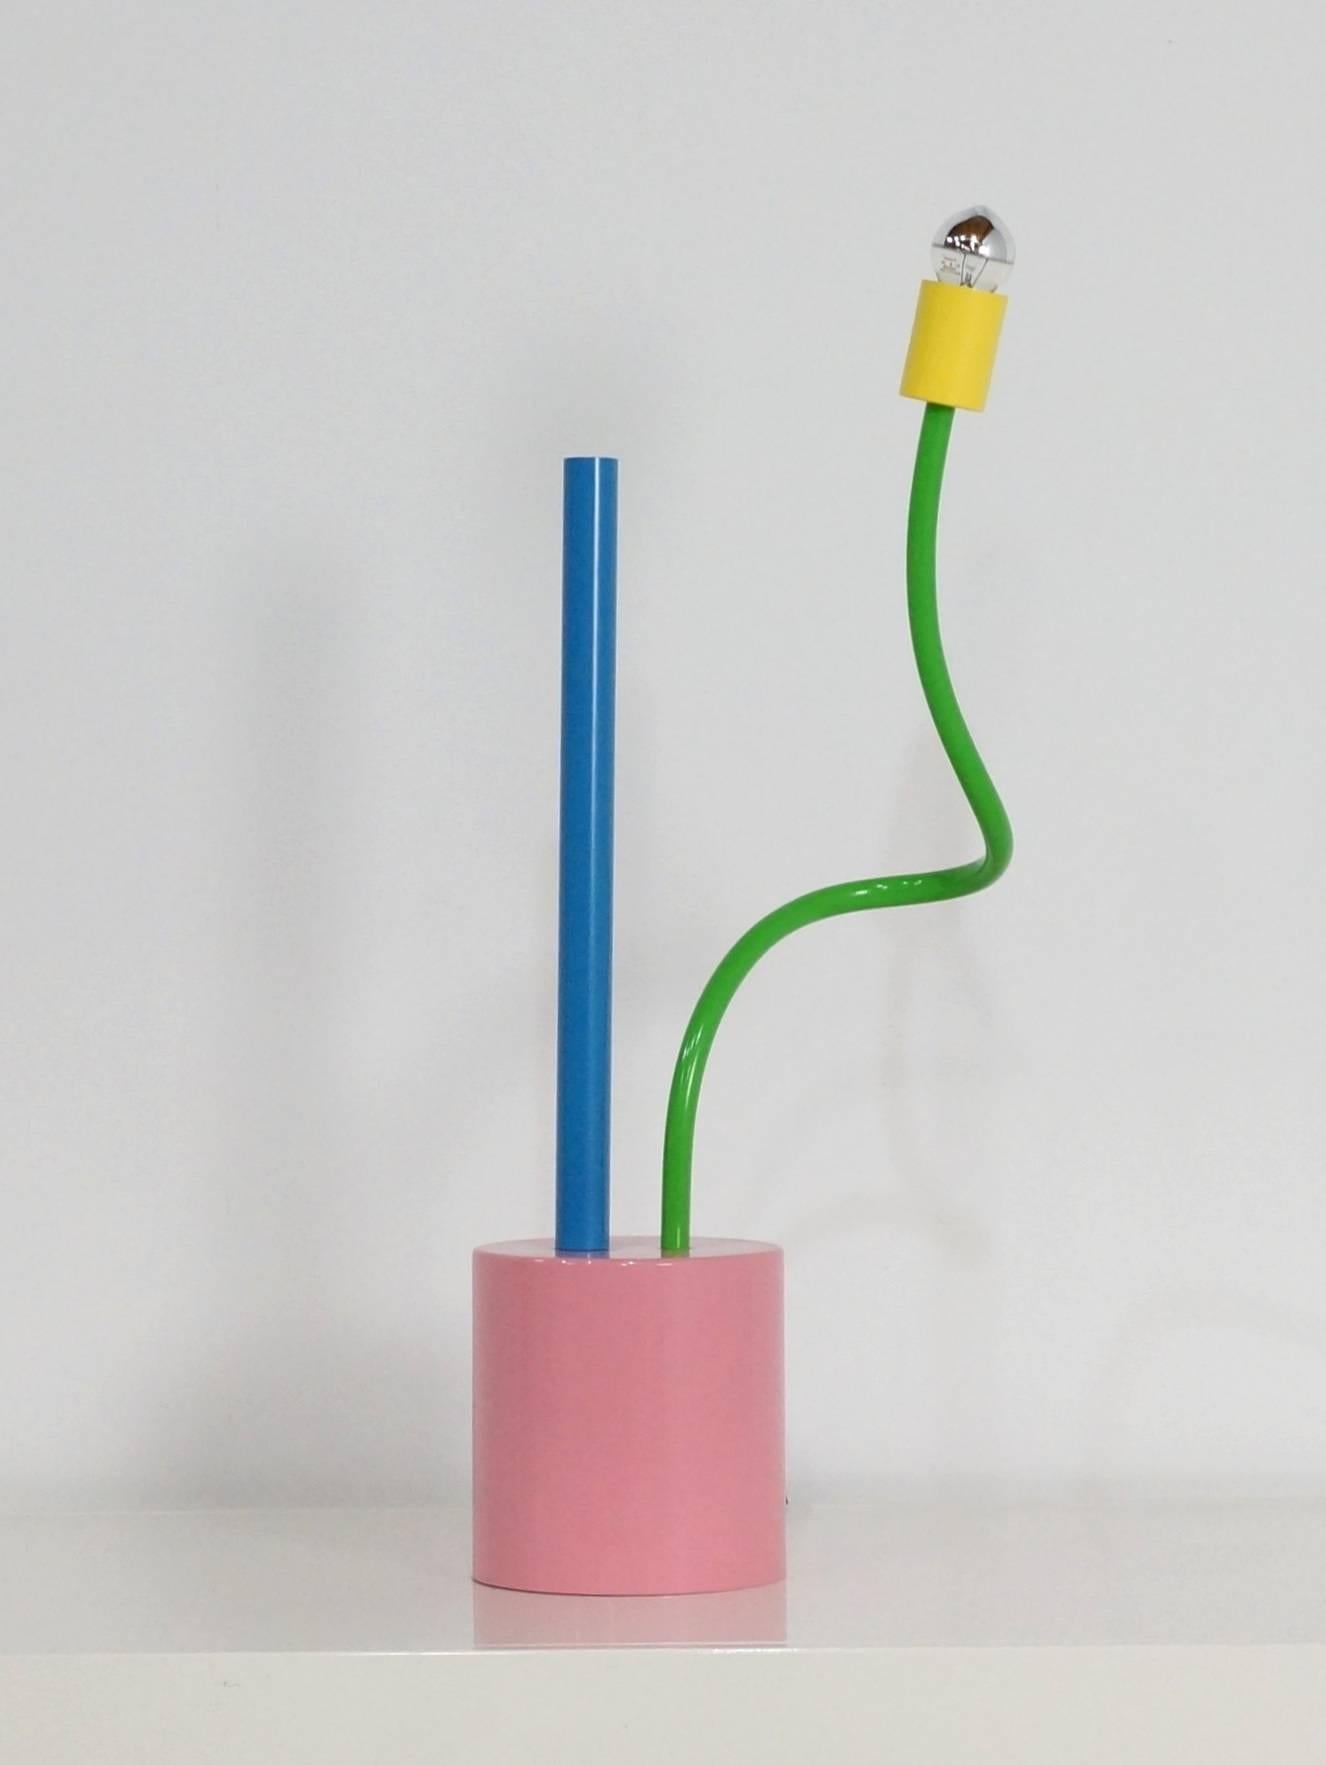 One of the early interior pieces from Michelle de Lucchi for Memphis, designed in 1978 this lamp was for the end of the 1970s period very modern in bright pink, green and blue colors and the "flower-power" design. The lamp is in very good